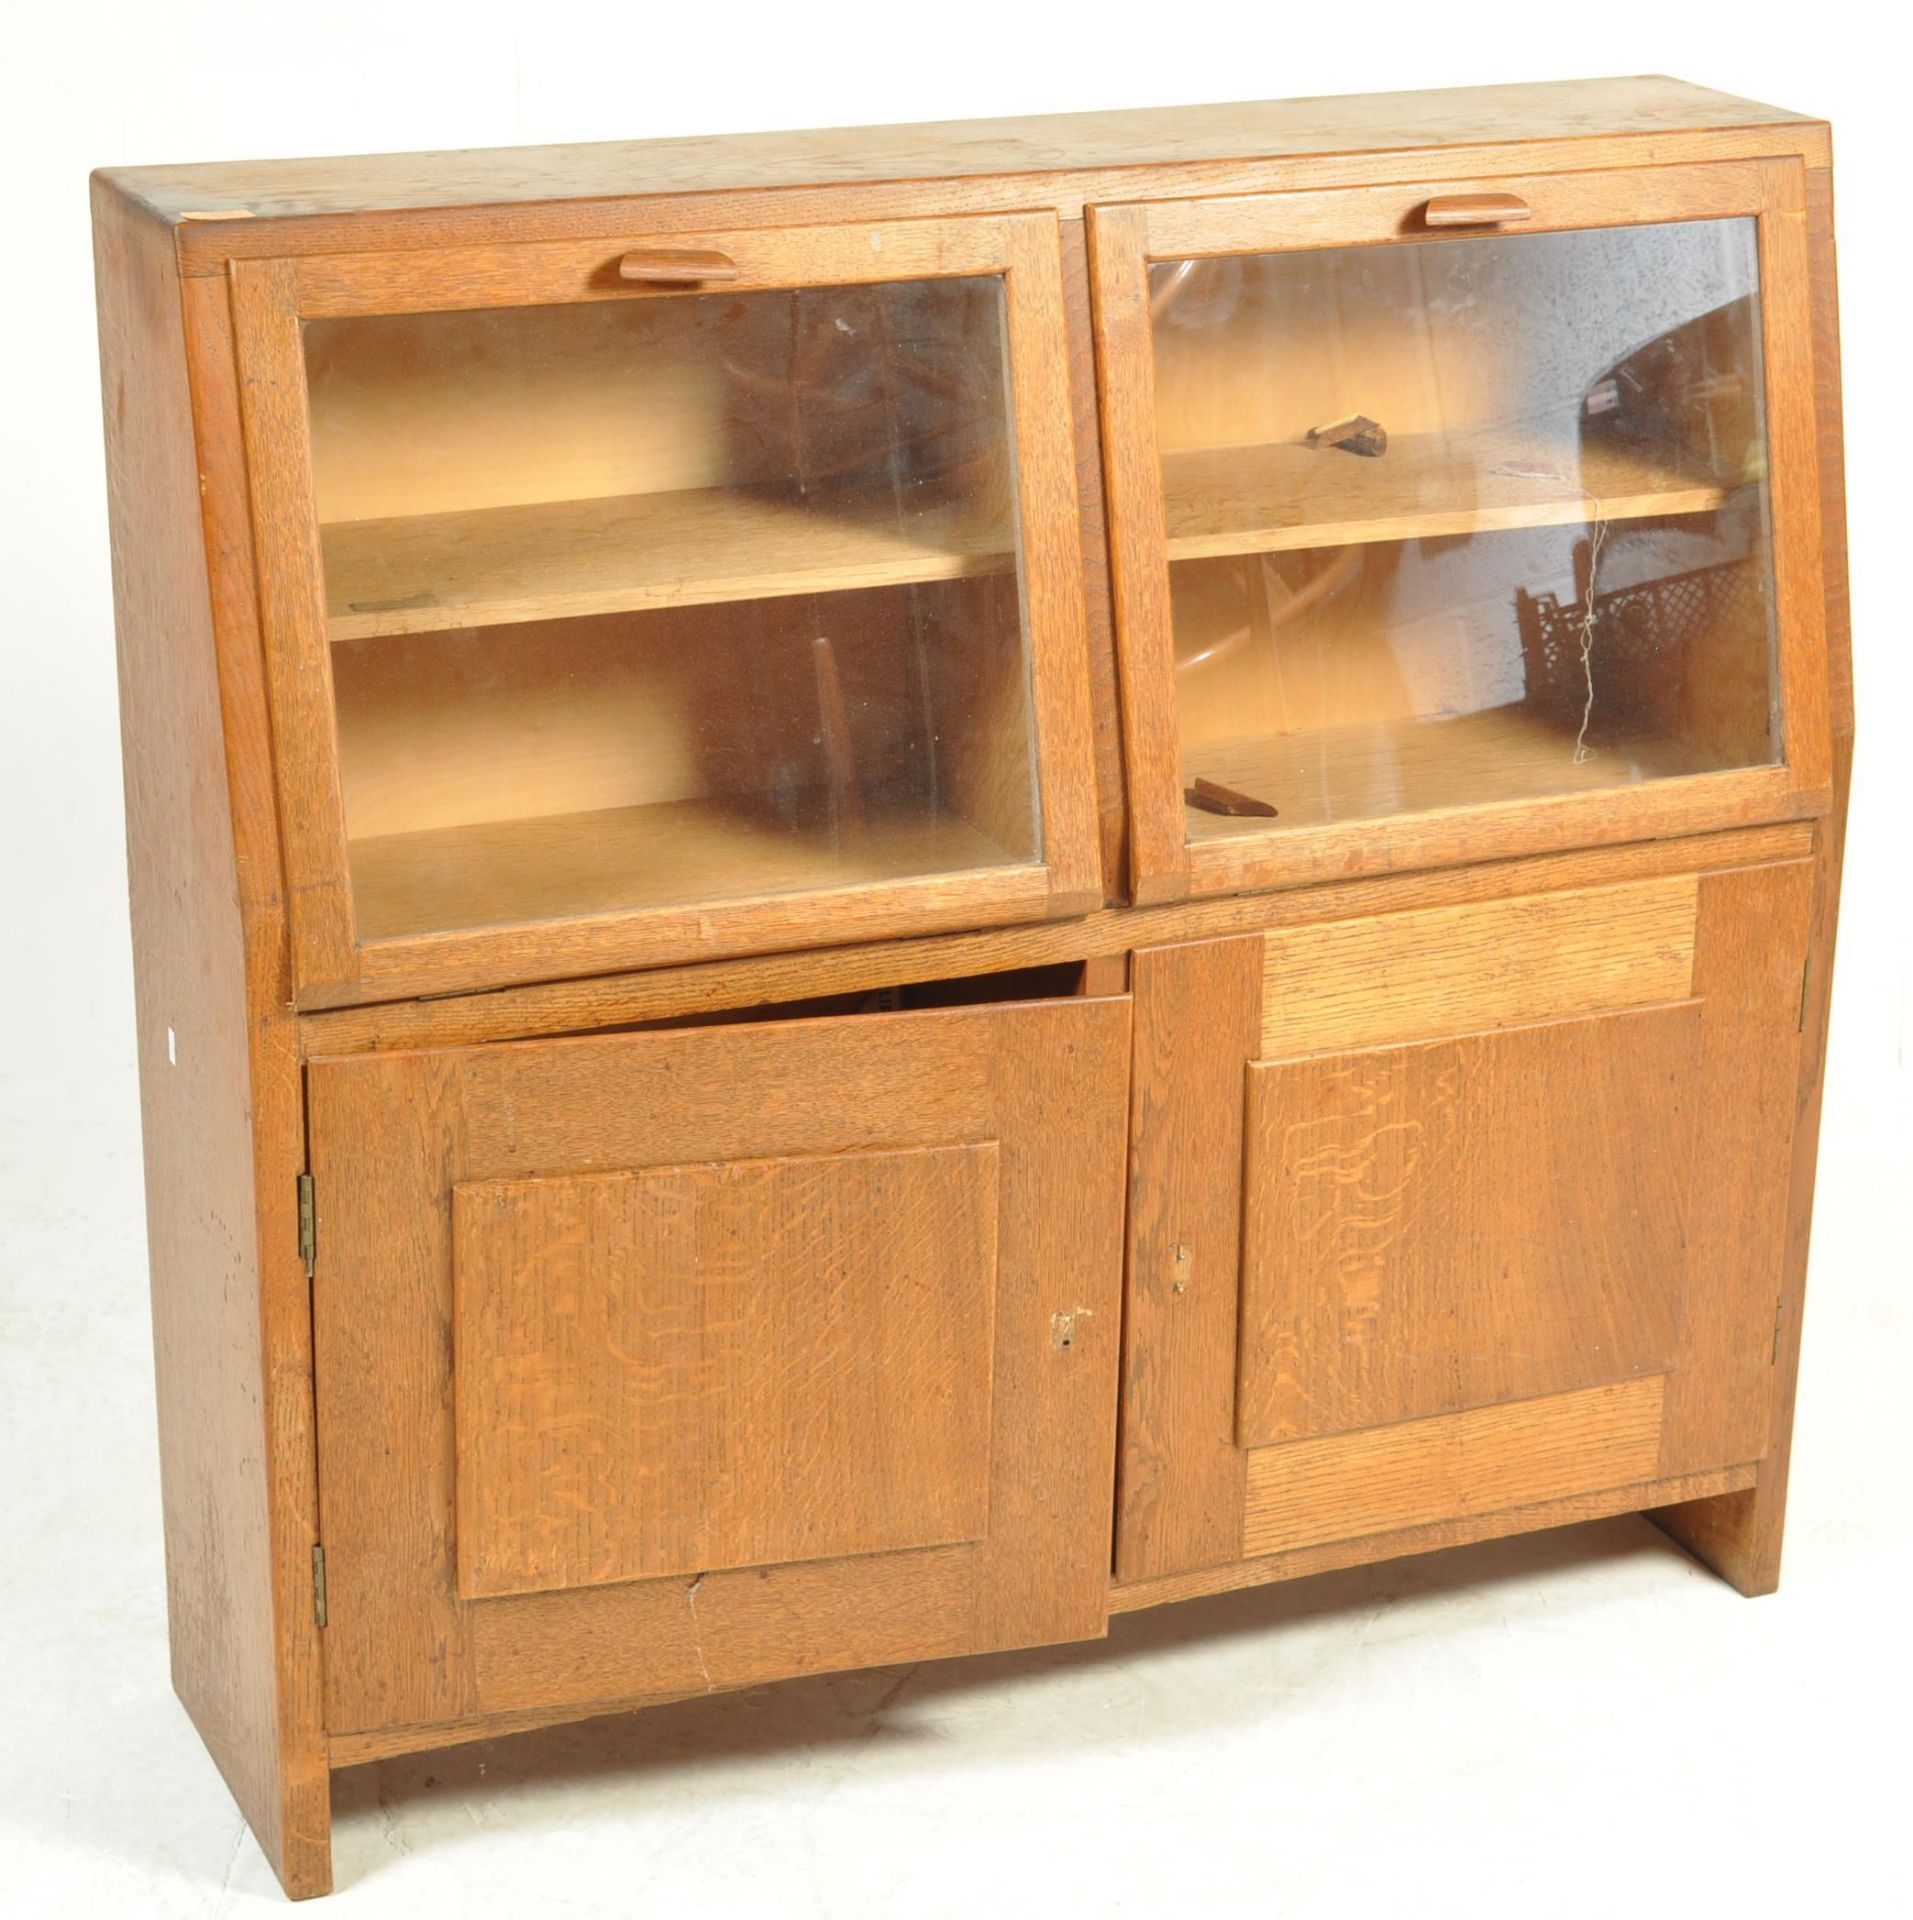 MID 20TH CENTURY DISPLAY CABINET/ BOOKCASE - Image 2 of 9